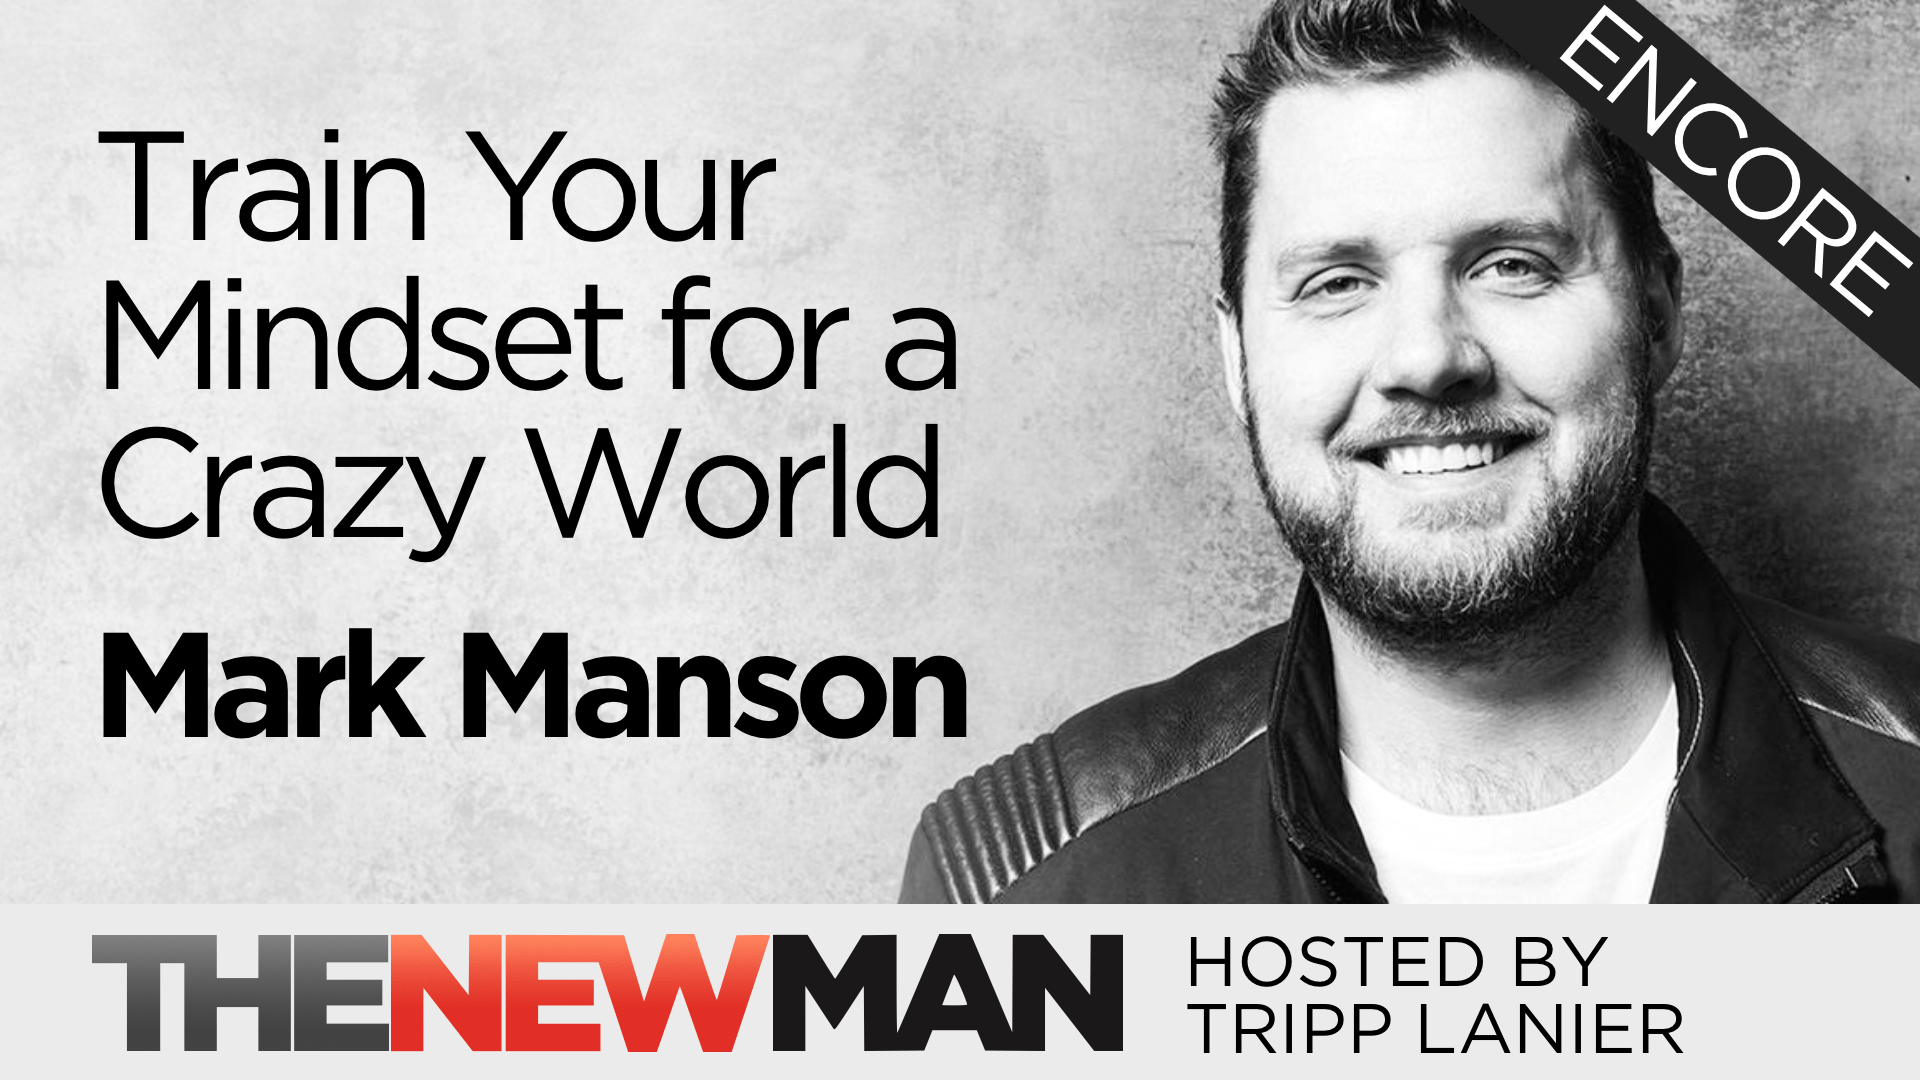 Mark Manson on Why the World is Going Crazy – Mark Manson (Encore)